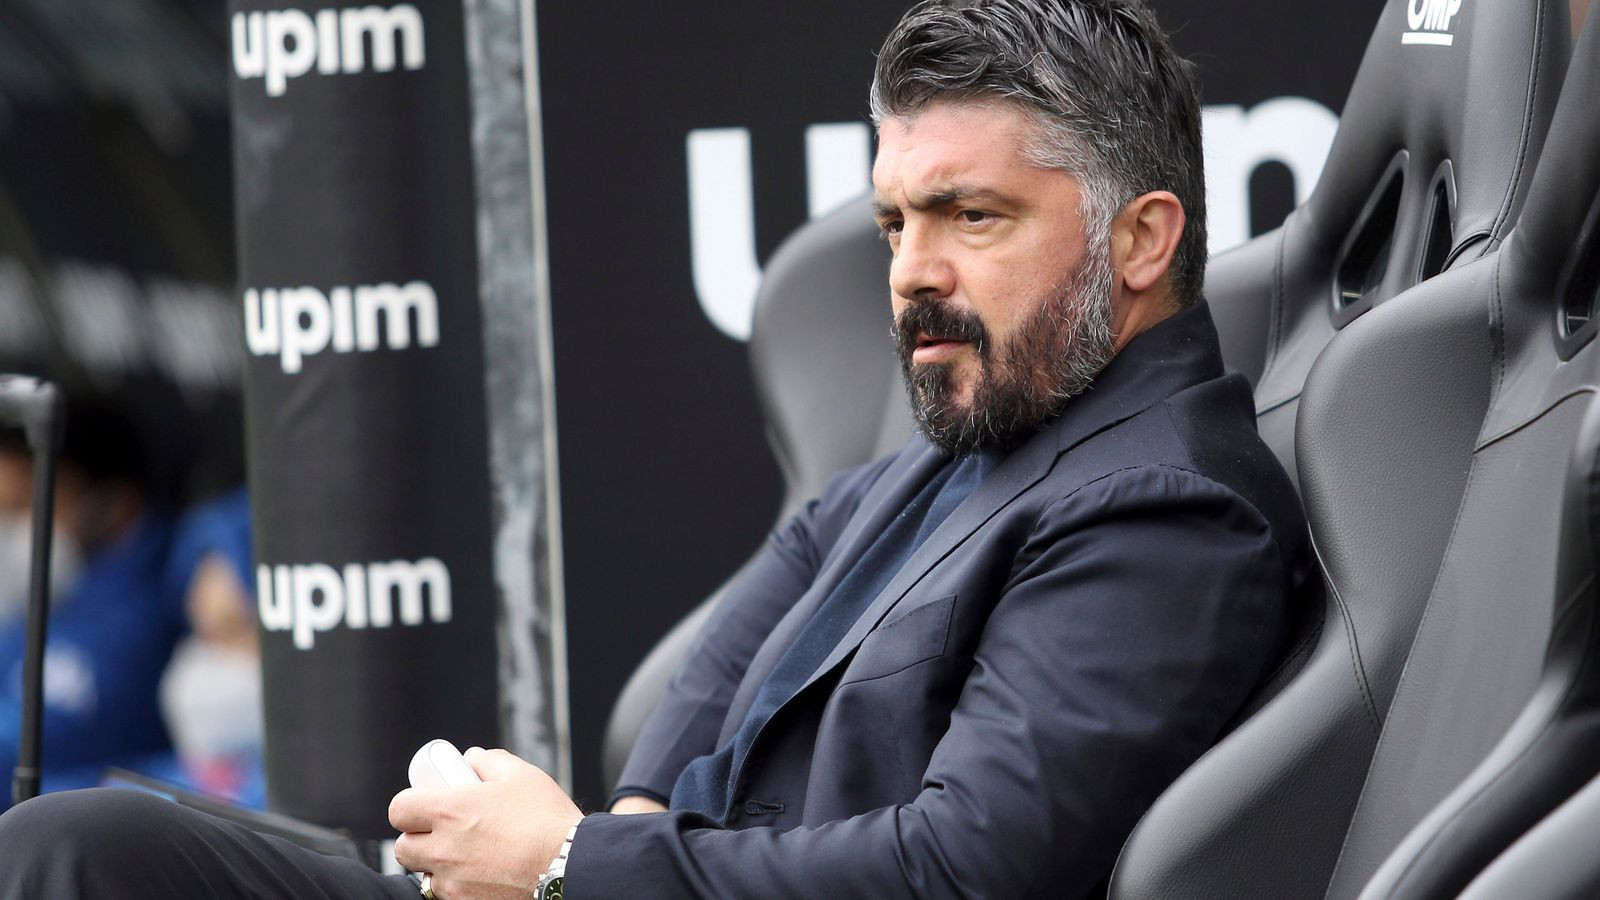 Gennaro Gattuso Set To Leave Fiorentina Only 23 Days After He Was Appointed As New Coach